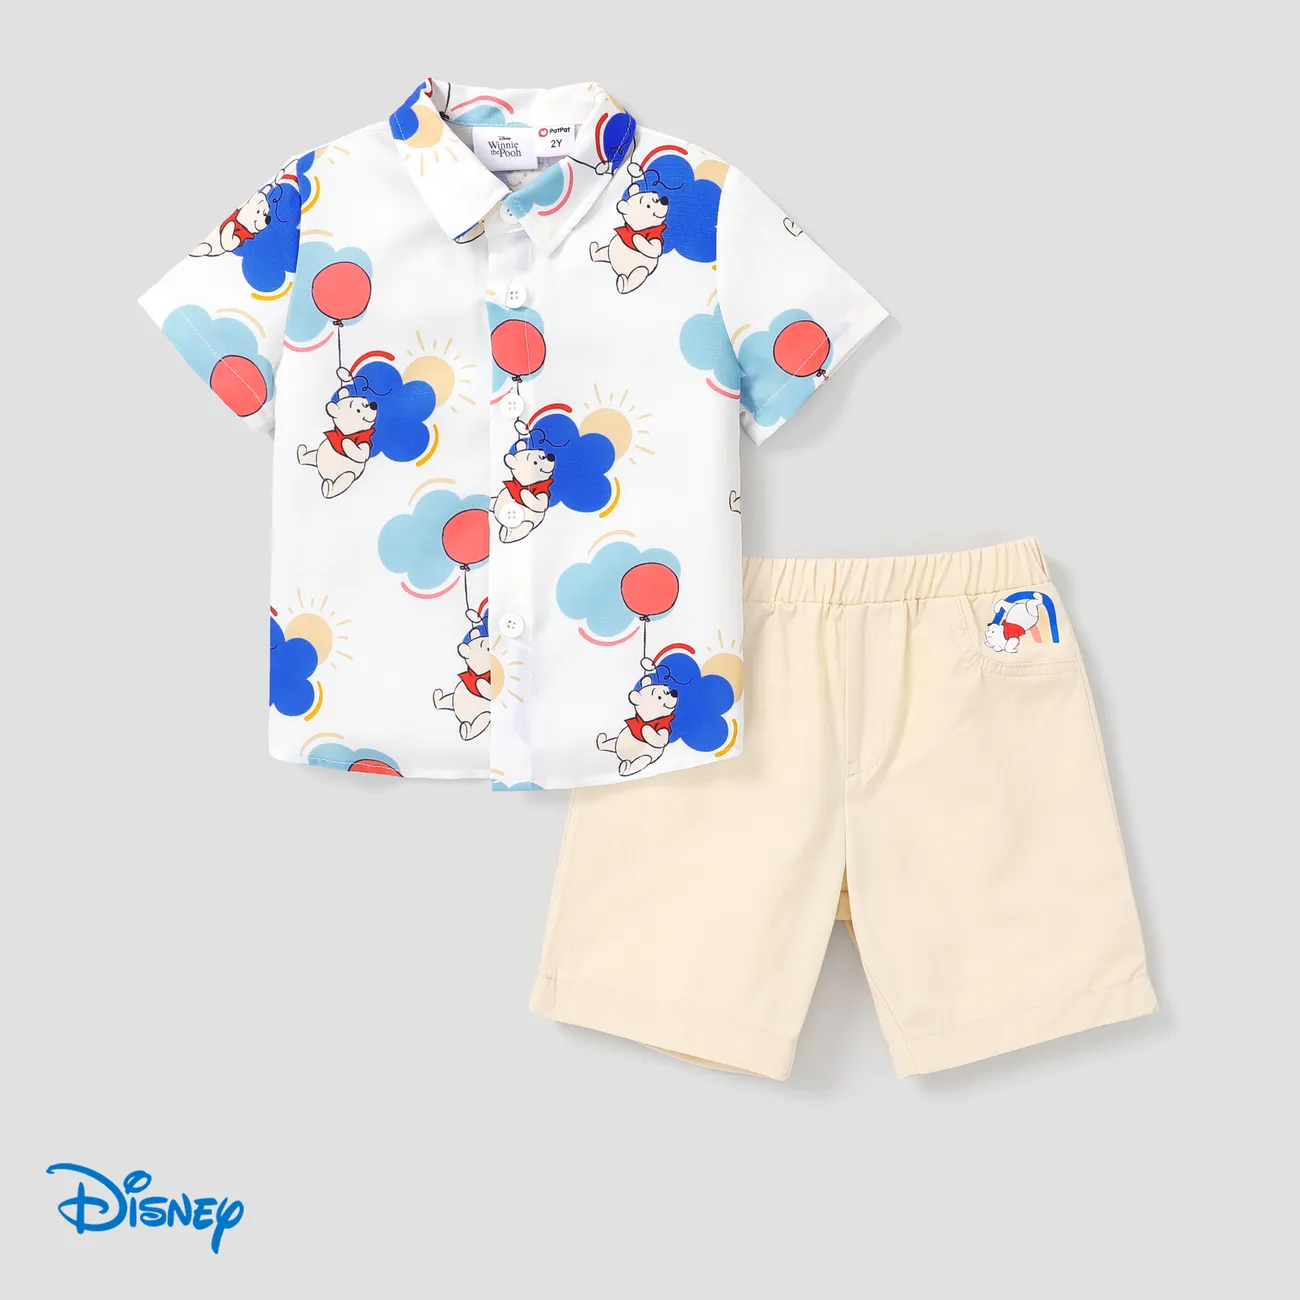 Disney Winnie the Pooh Toddler Boy 2pcs Shirt with Lapel and Shorts Set OffWhite big image 1